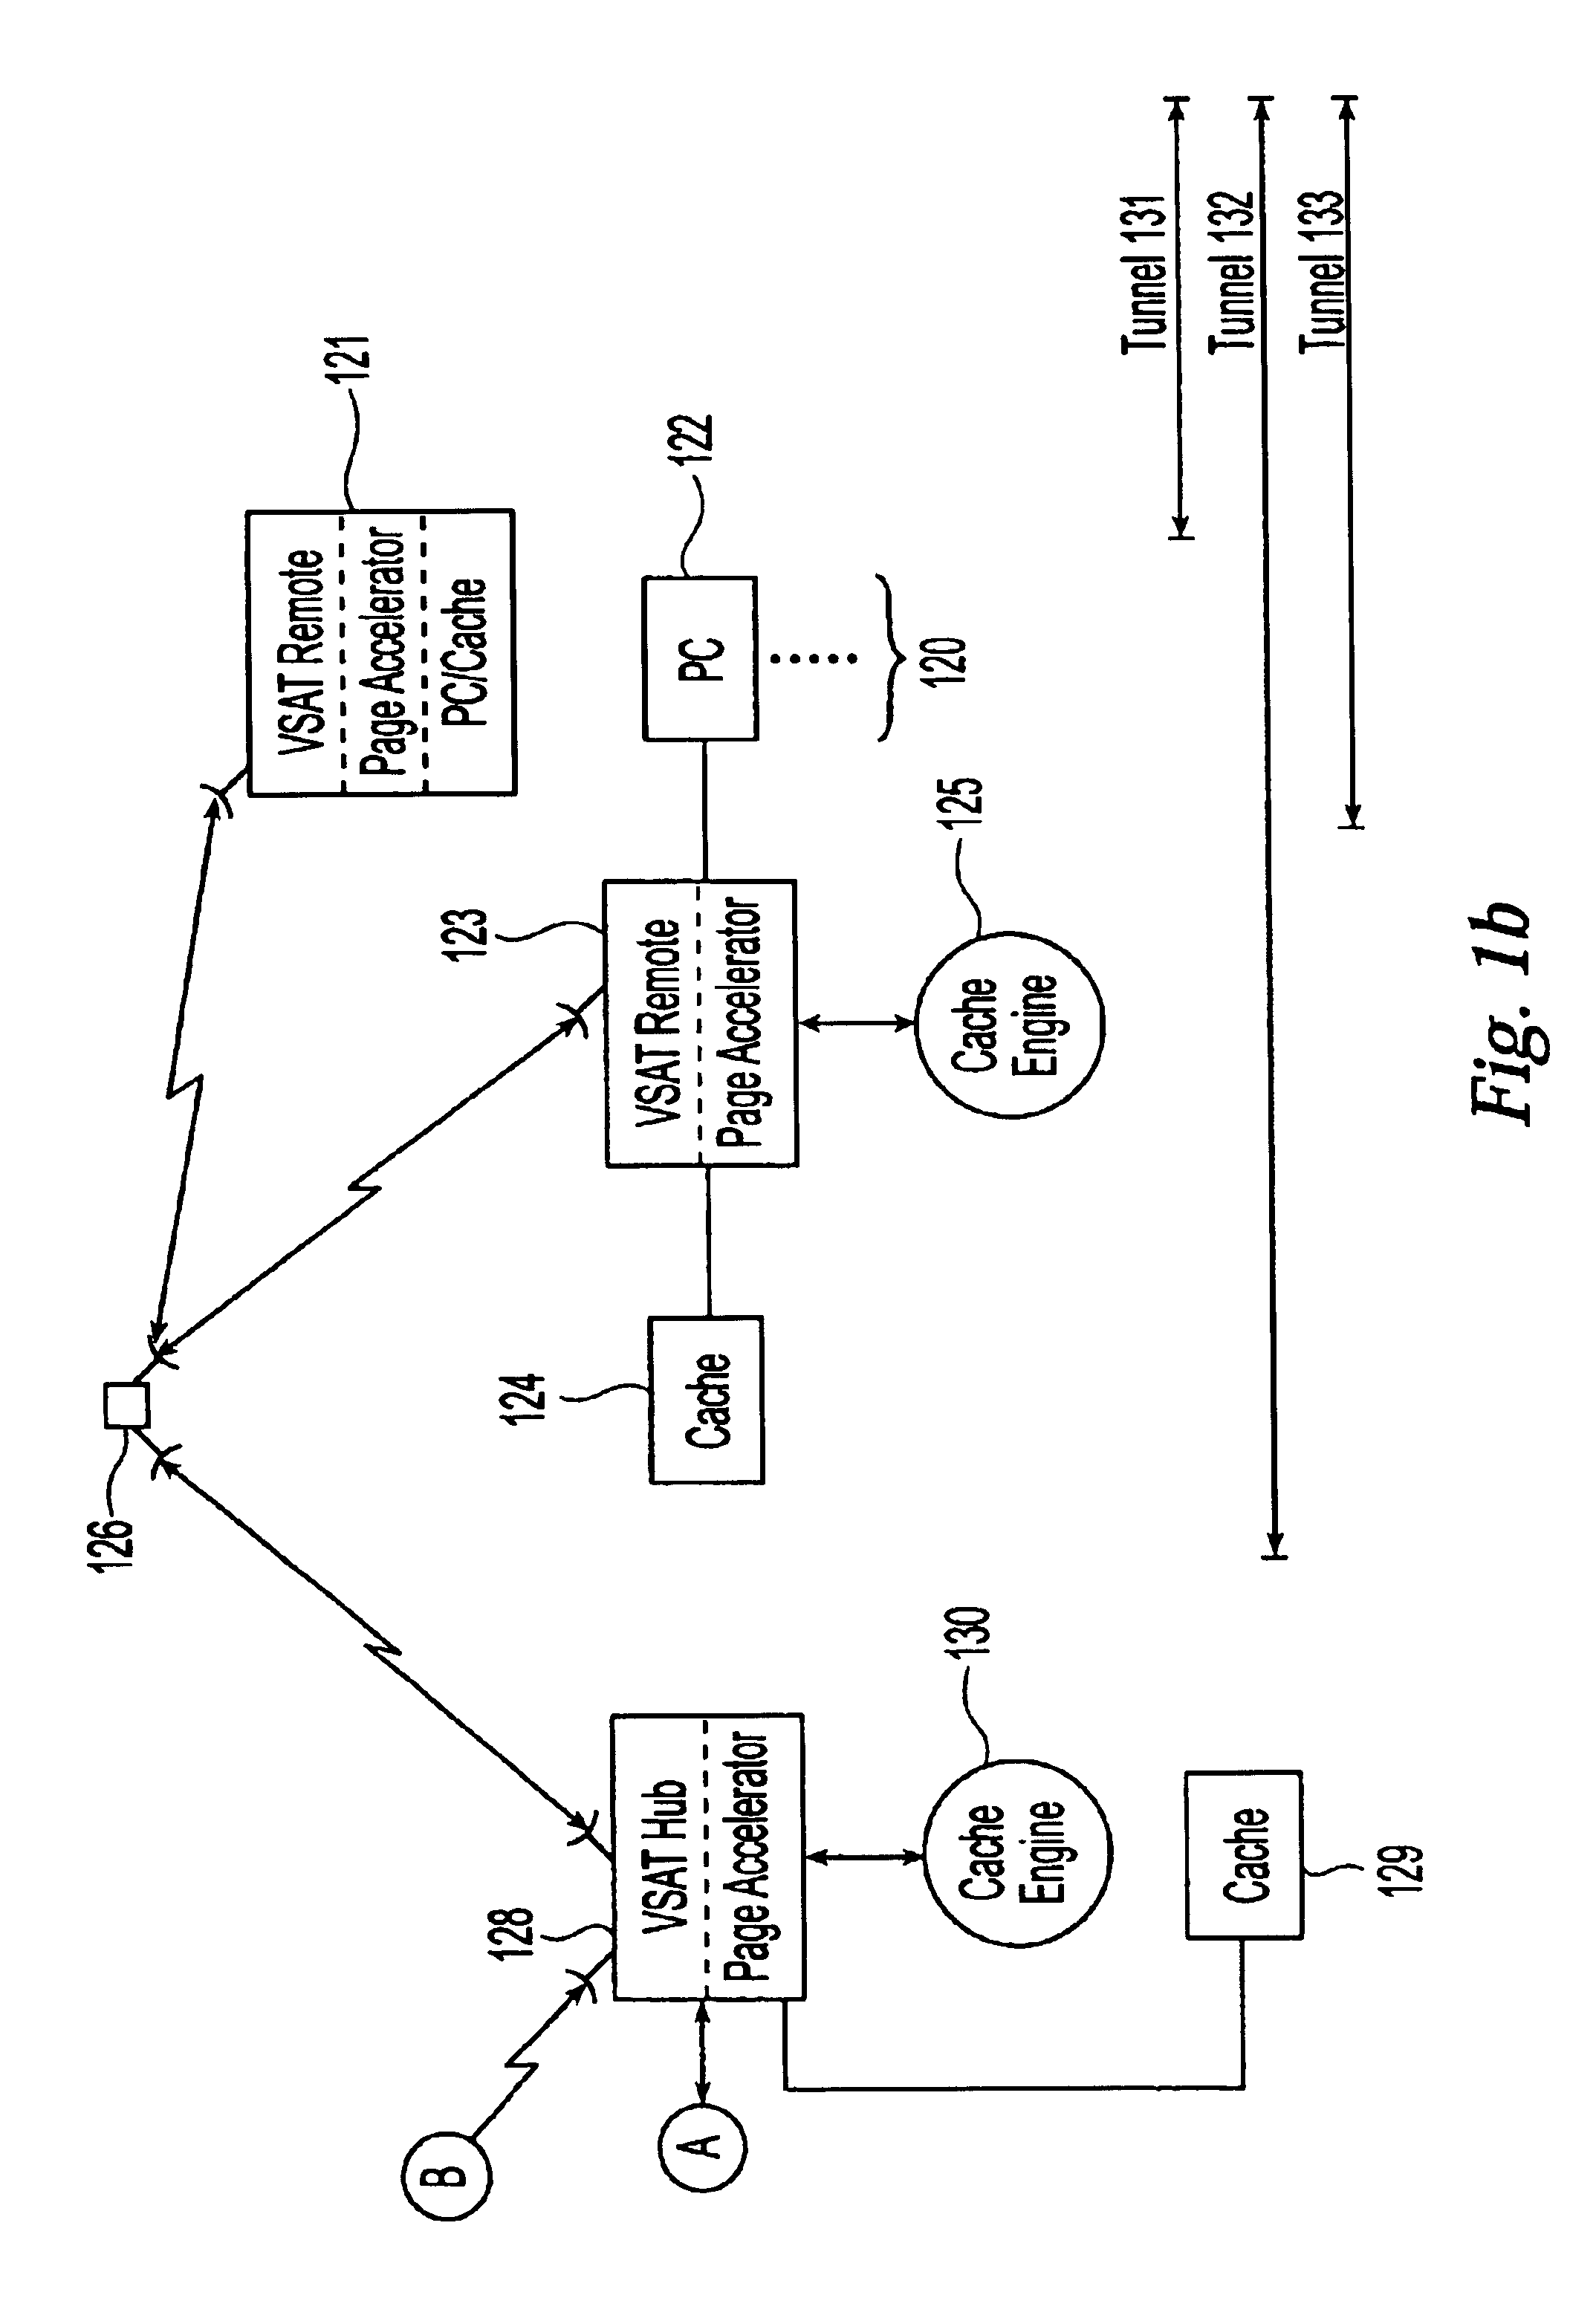 System and method for internet page acceleration including multicast transmissions